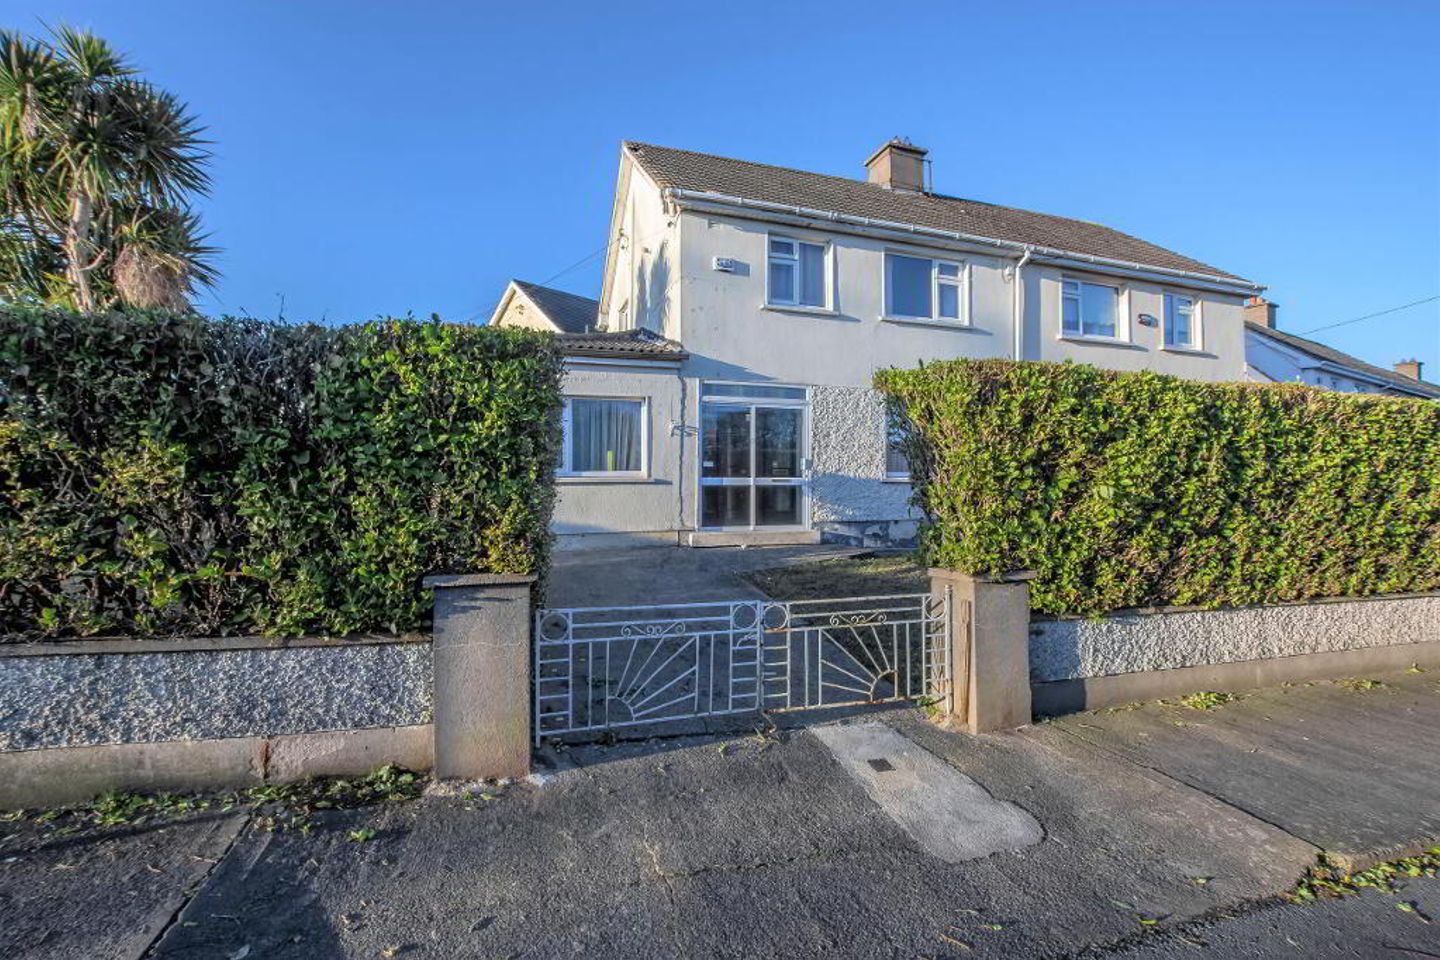 52 Manor Lawn, Waterford City, Co. Waterford